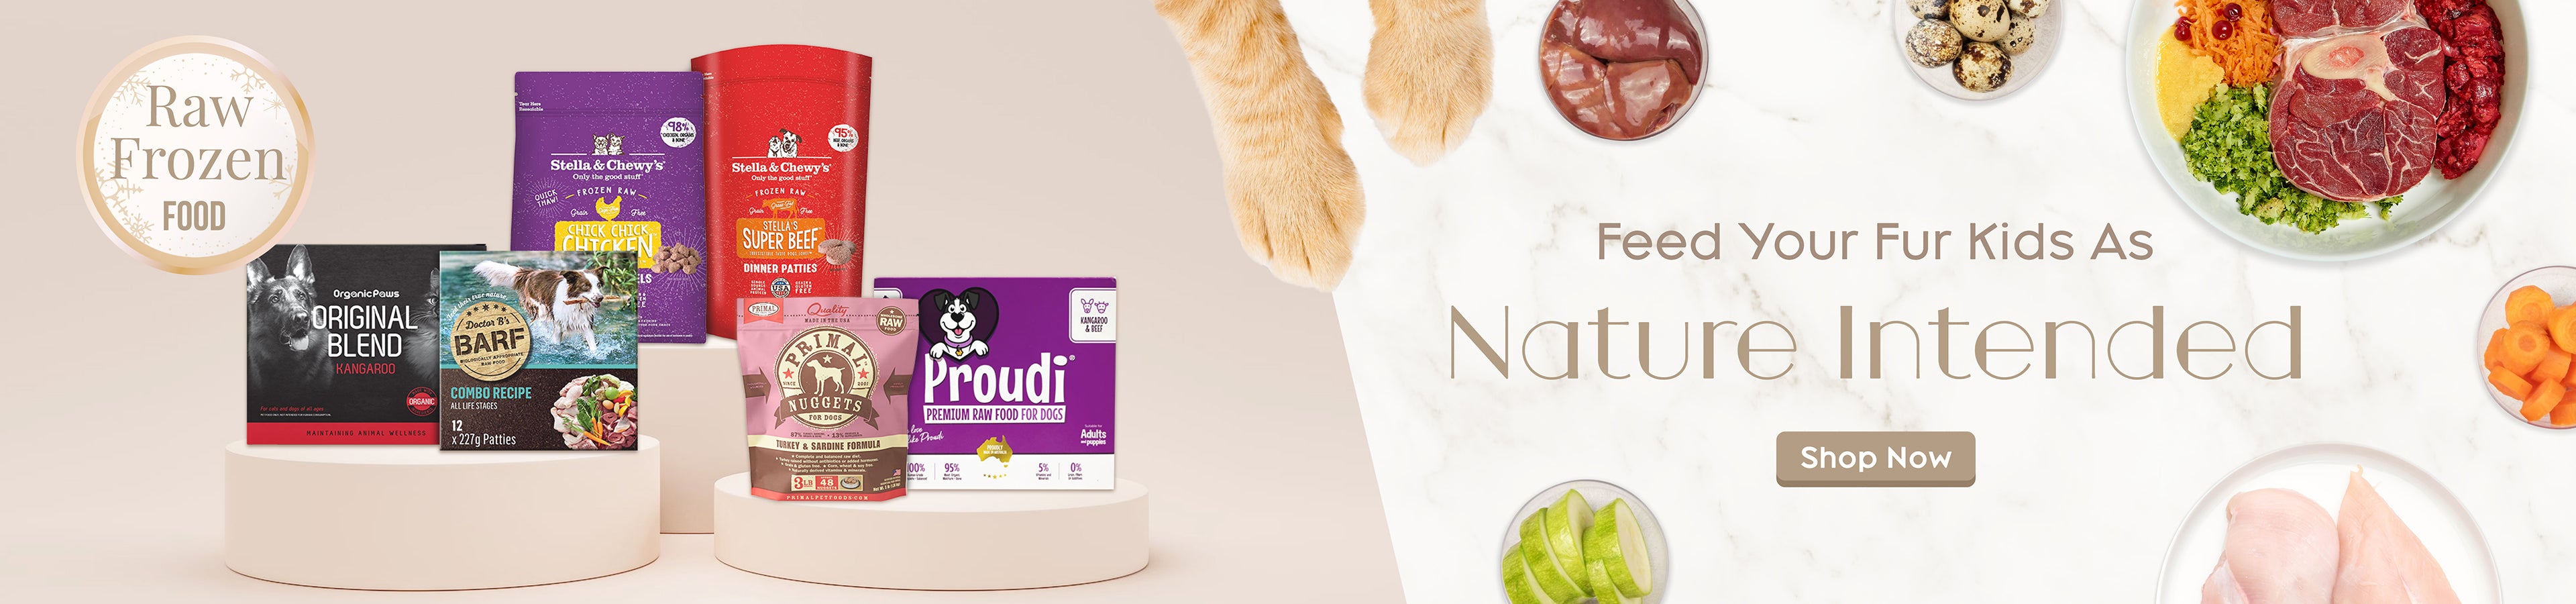 Feed your fur kids as nature intended